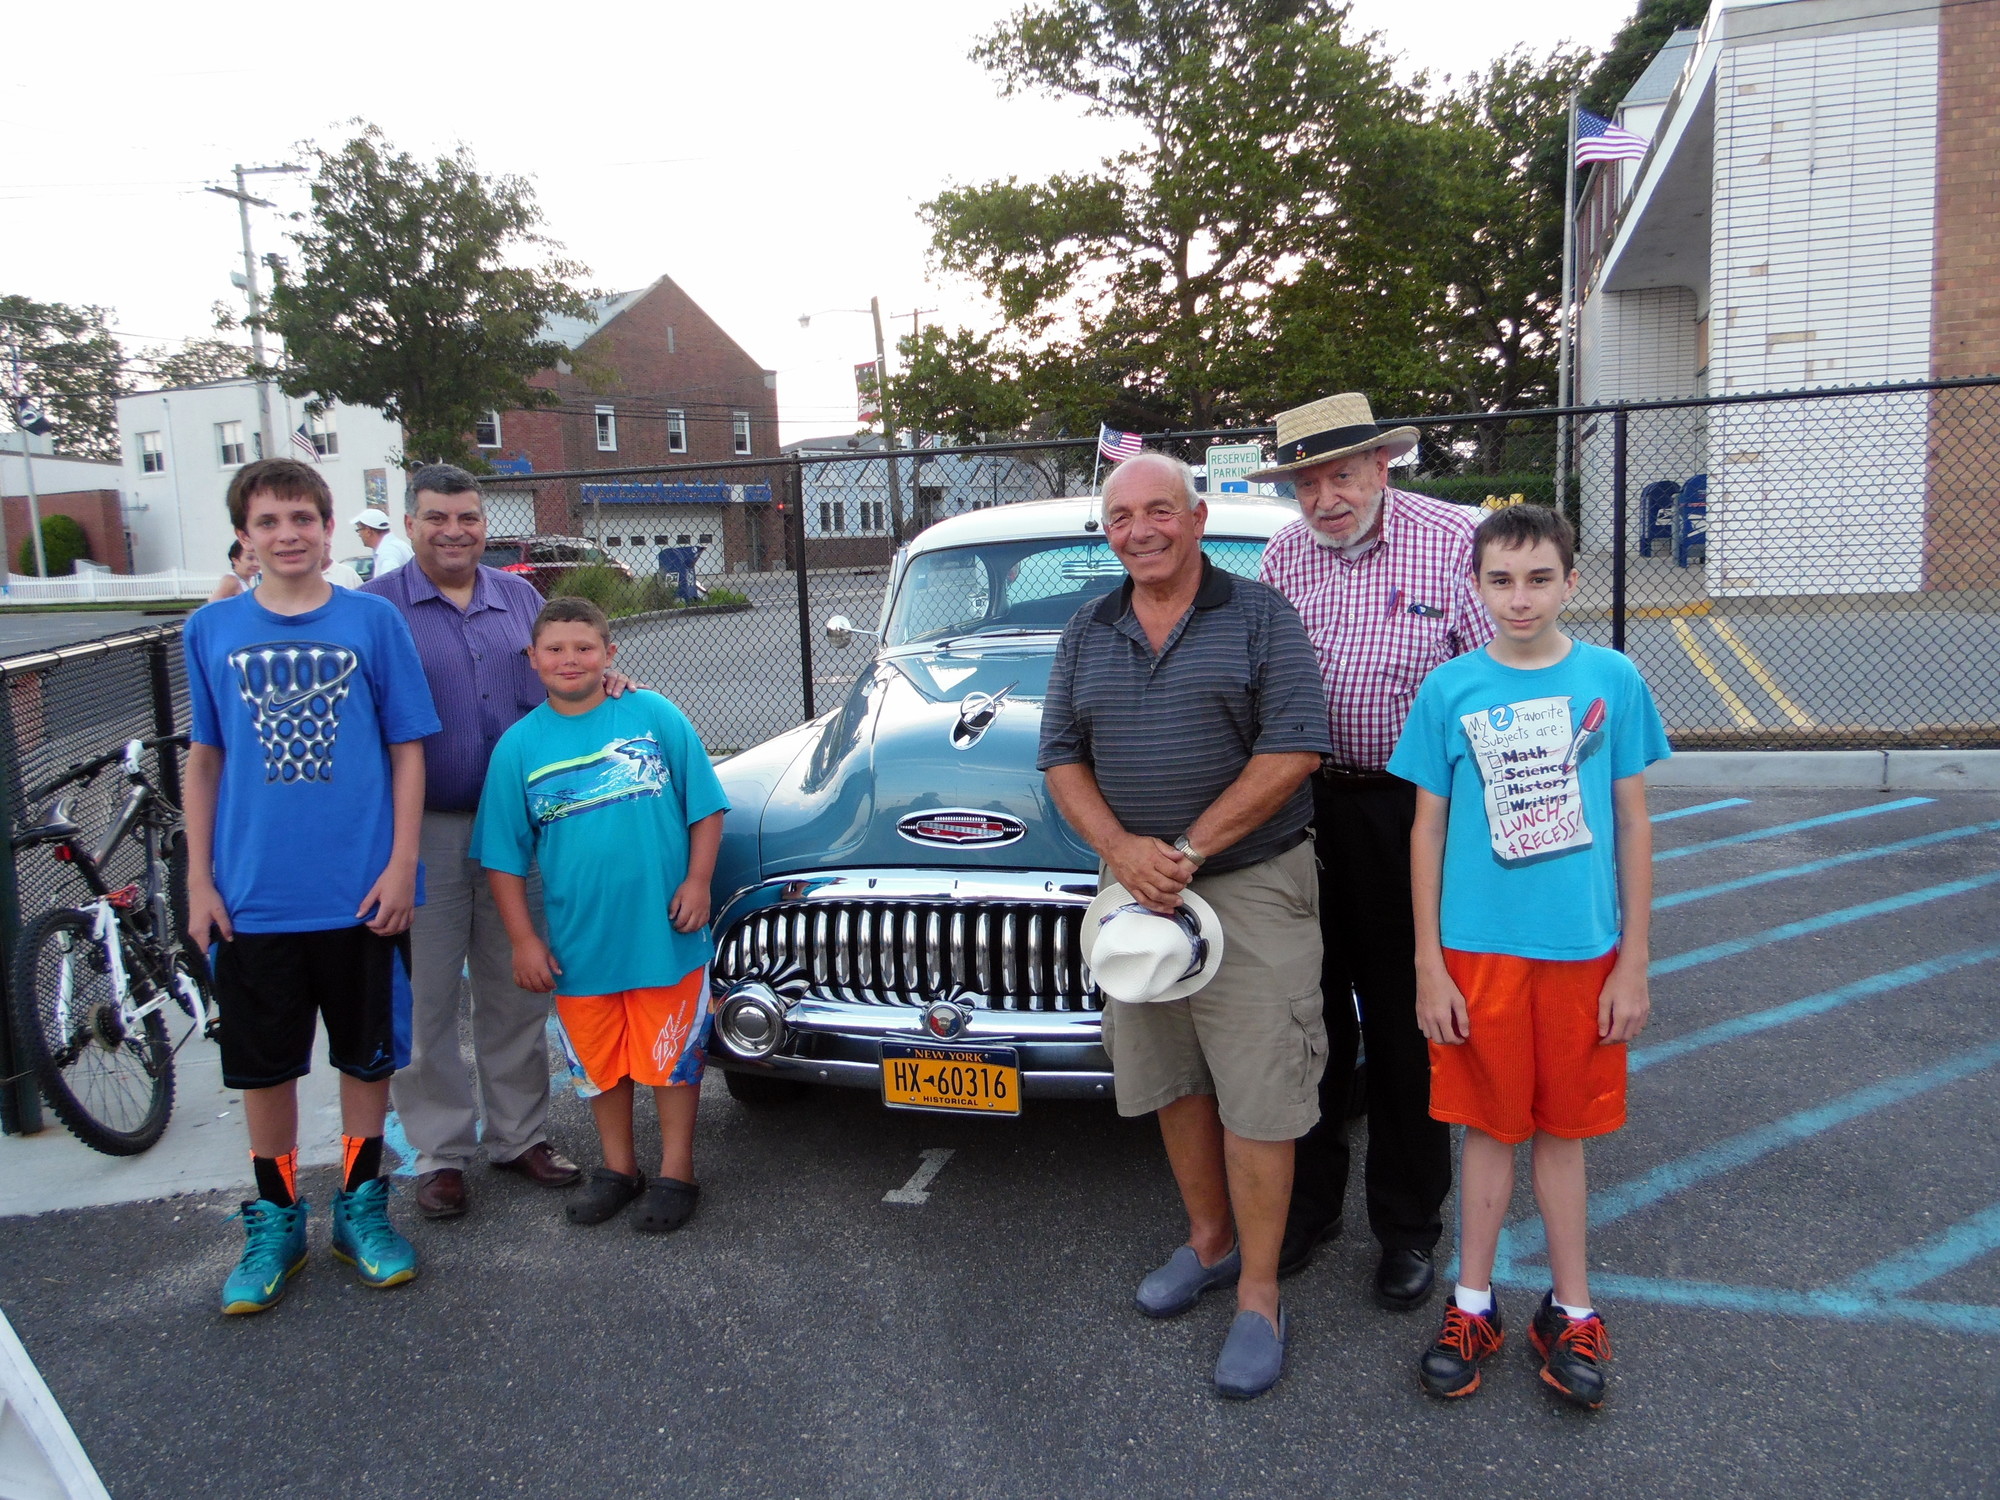 Car show coordinator Rich Cittadino, third from right, welcomed his helpers, local officials, and members of the East Rockaway Education Foundation. With him in front of a Buick Special Riviera were, from left, Matt Miller, 14, Mayor Bruno Romano and his 9-year-old son, Joseph, EREF President Richard Meagher, and Scott Buzzolani, 14, The boys helped put together the raffle baskets.